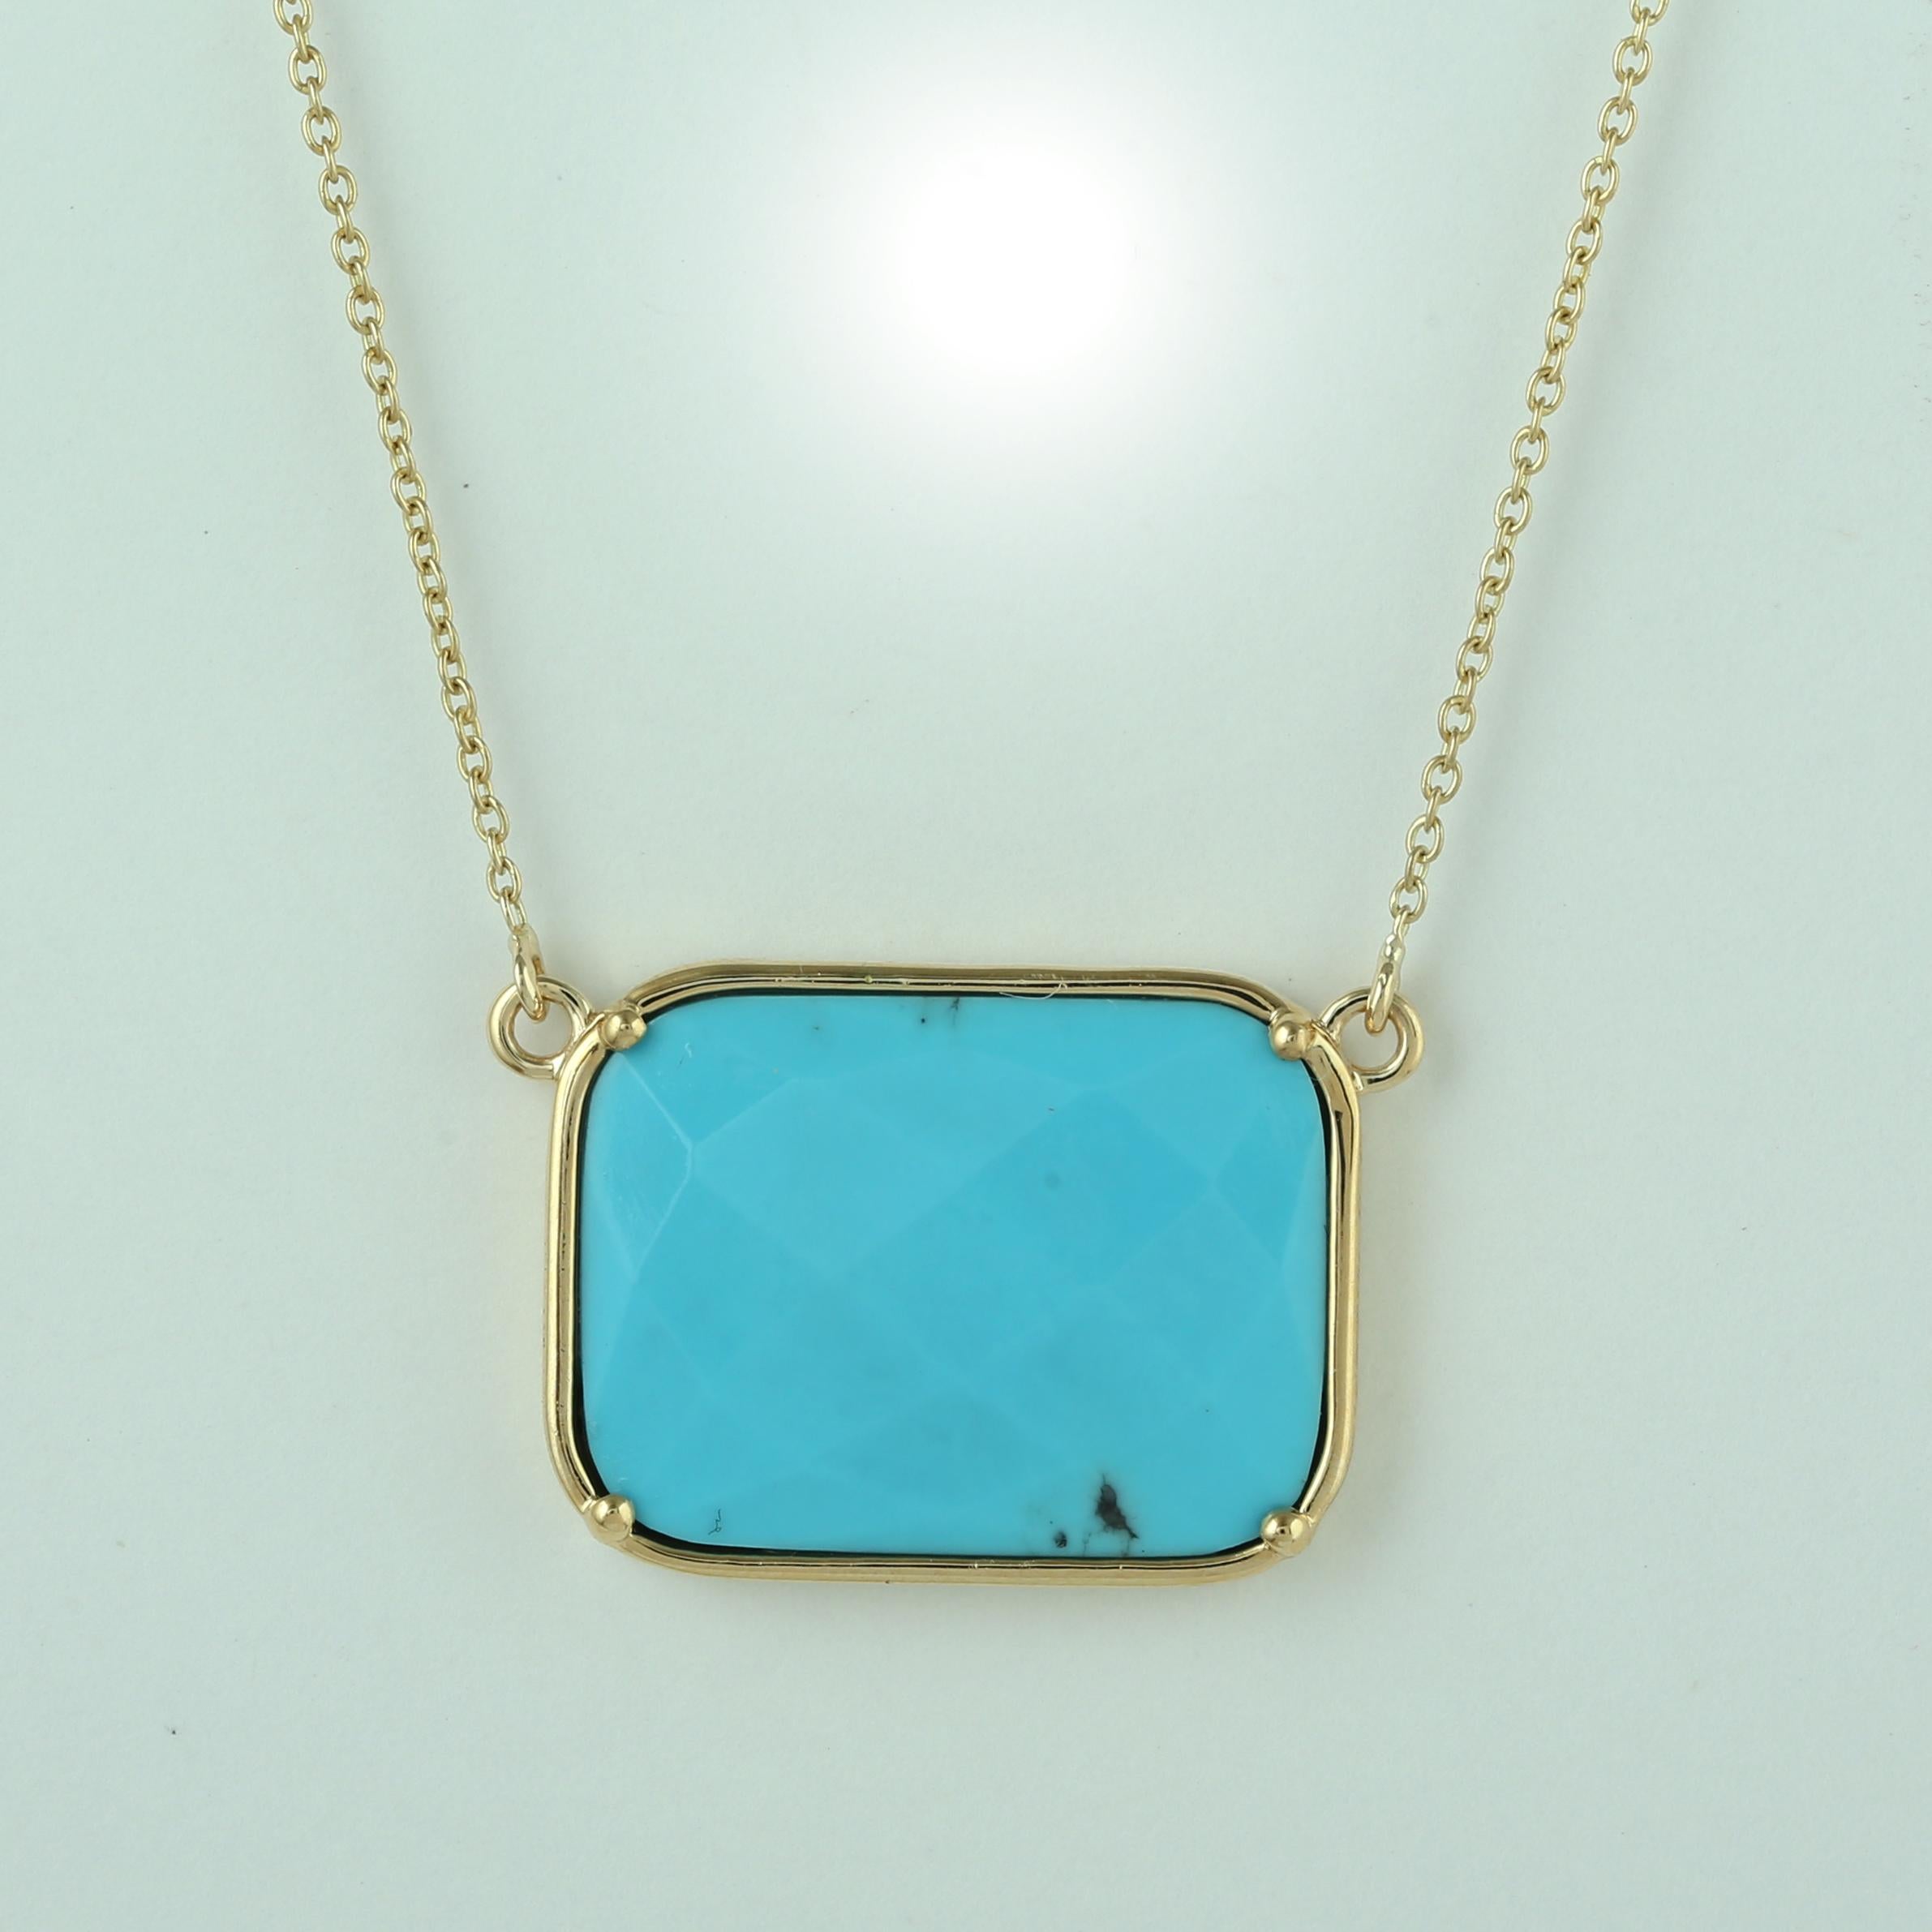 Art Nouveau Cushion Shaped Blue Turquoise Pendant Necklace Made In 18K Yellow Gold For Sale